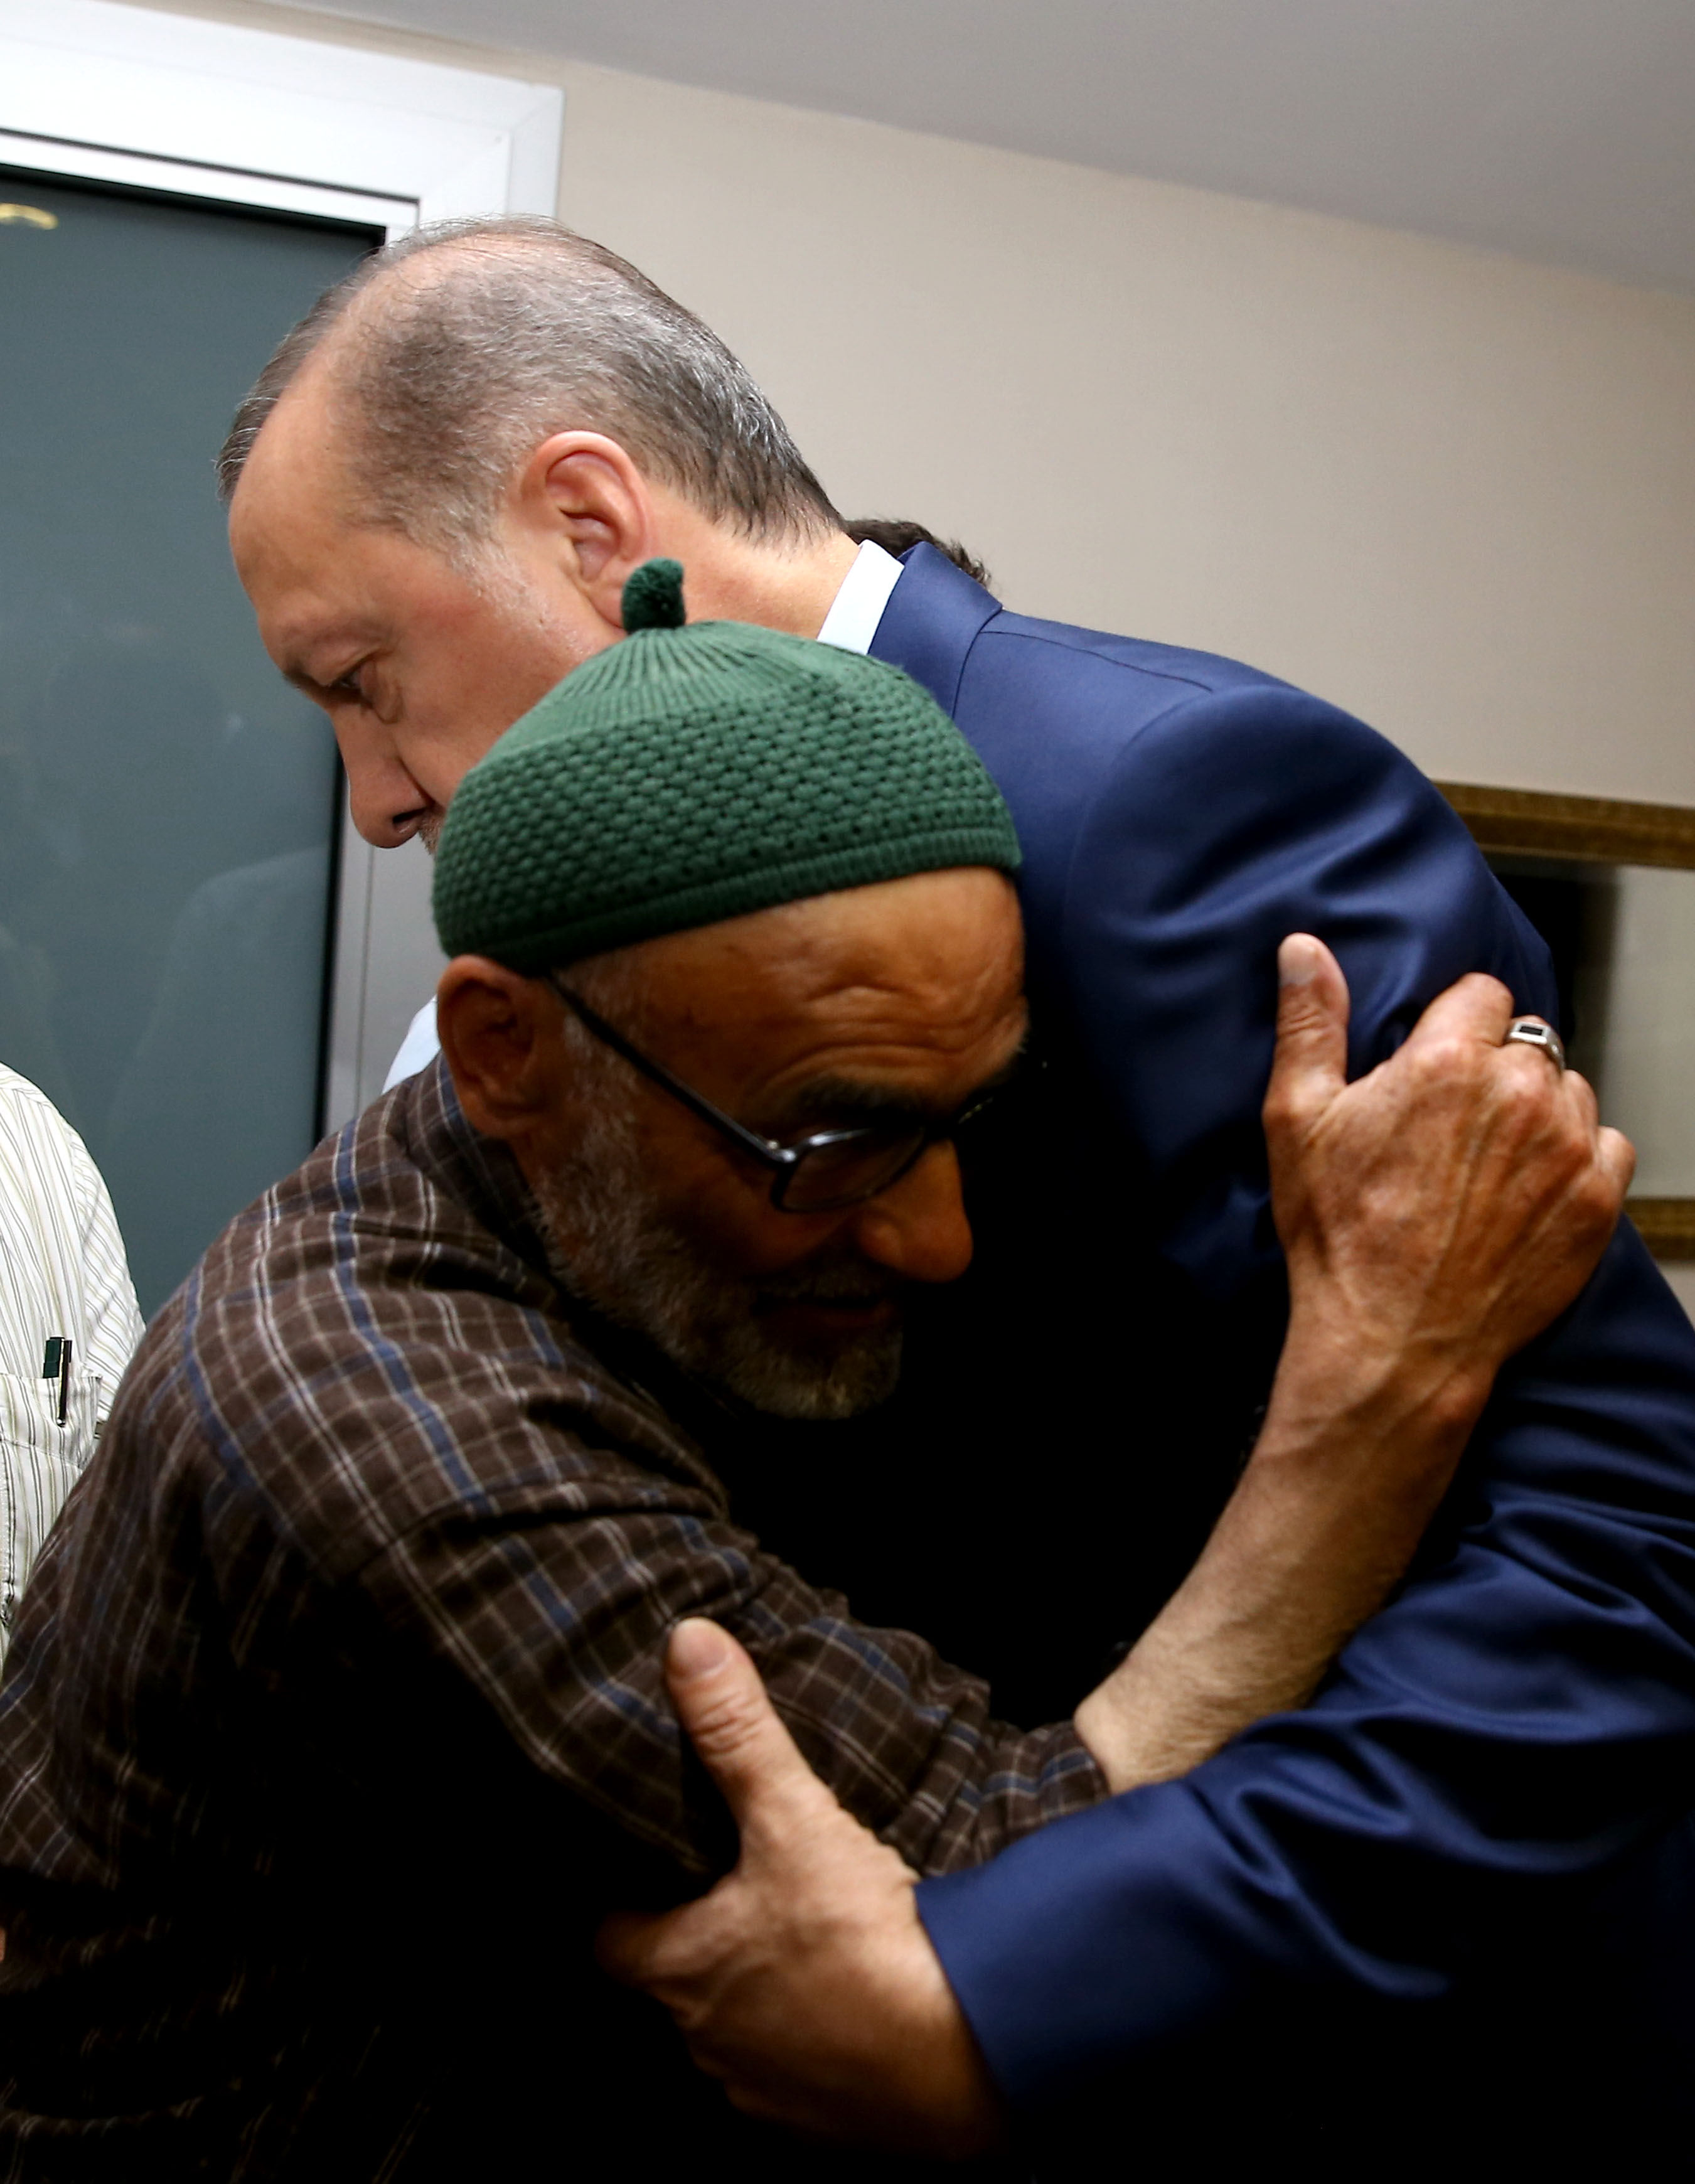 President Erdoğan wished patience and strength to the family of the martyr including the father Ahmet, grandfather Asim, and brother Kadir Yaşar.